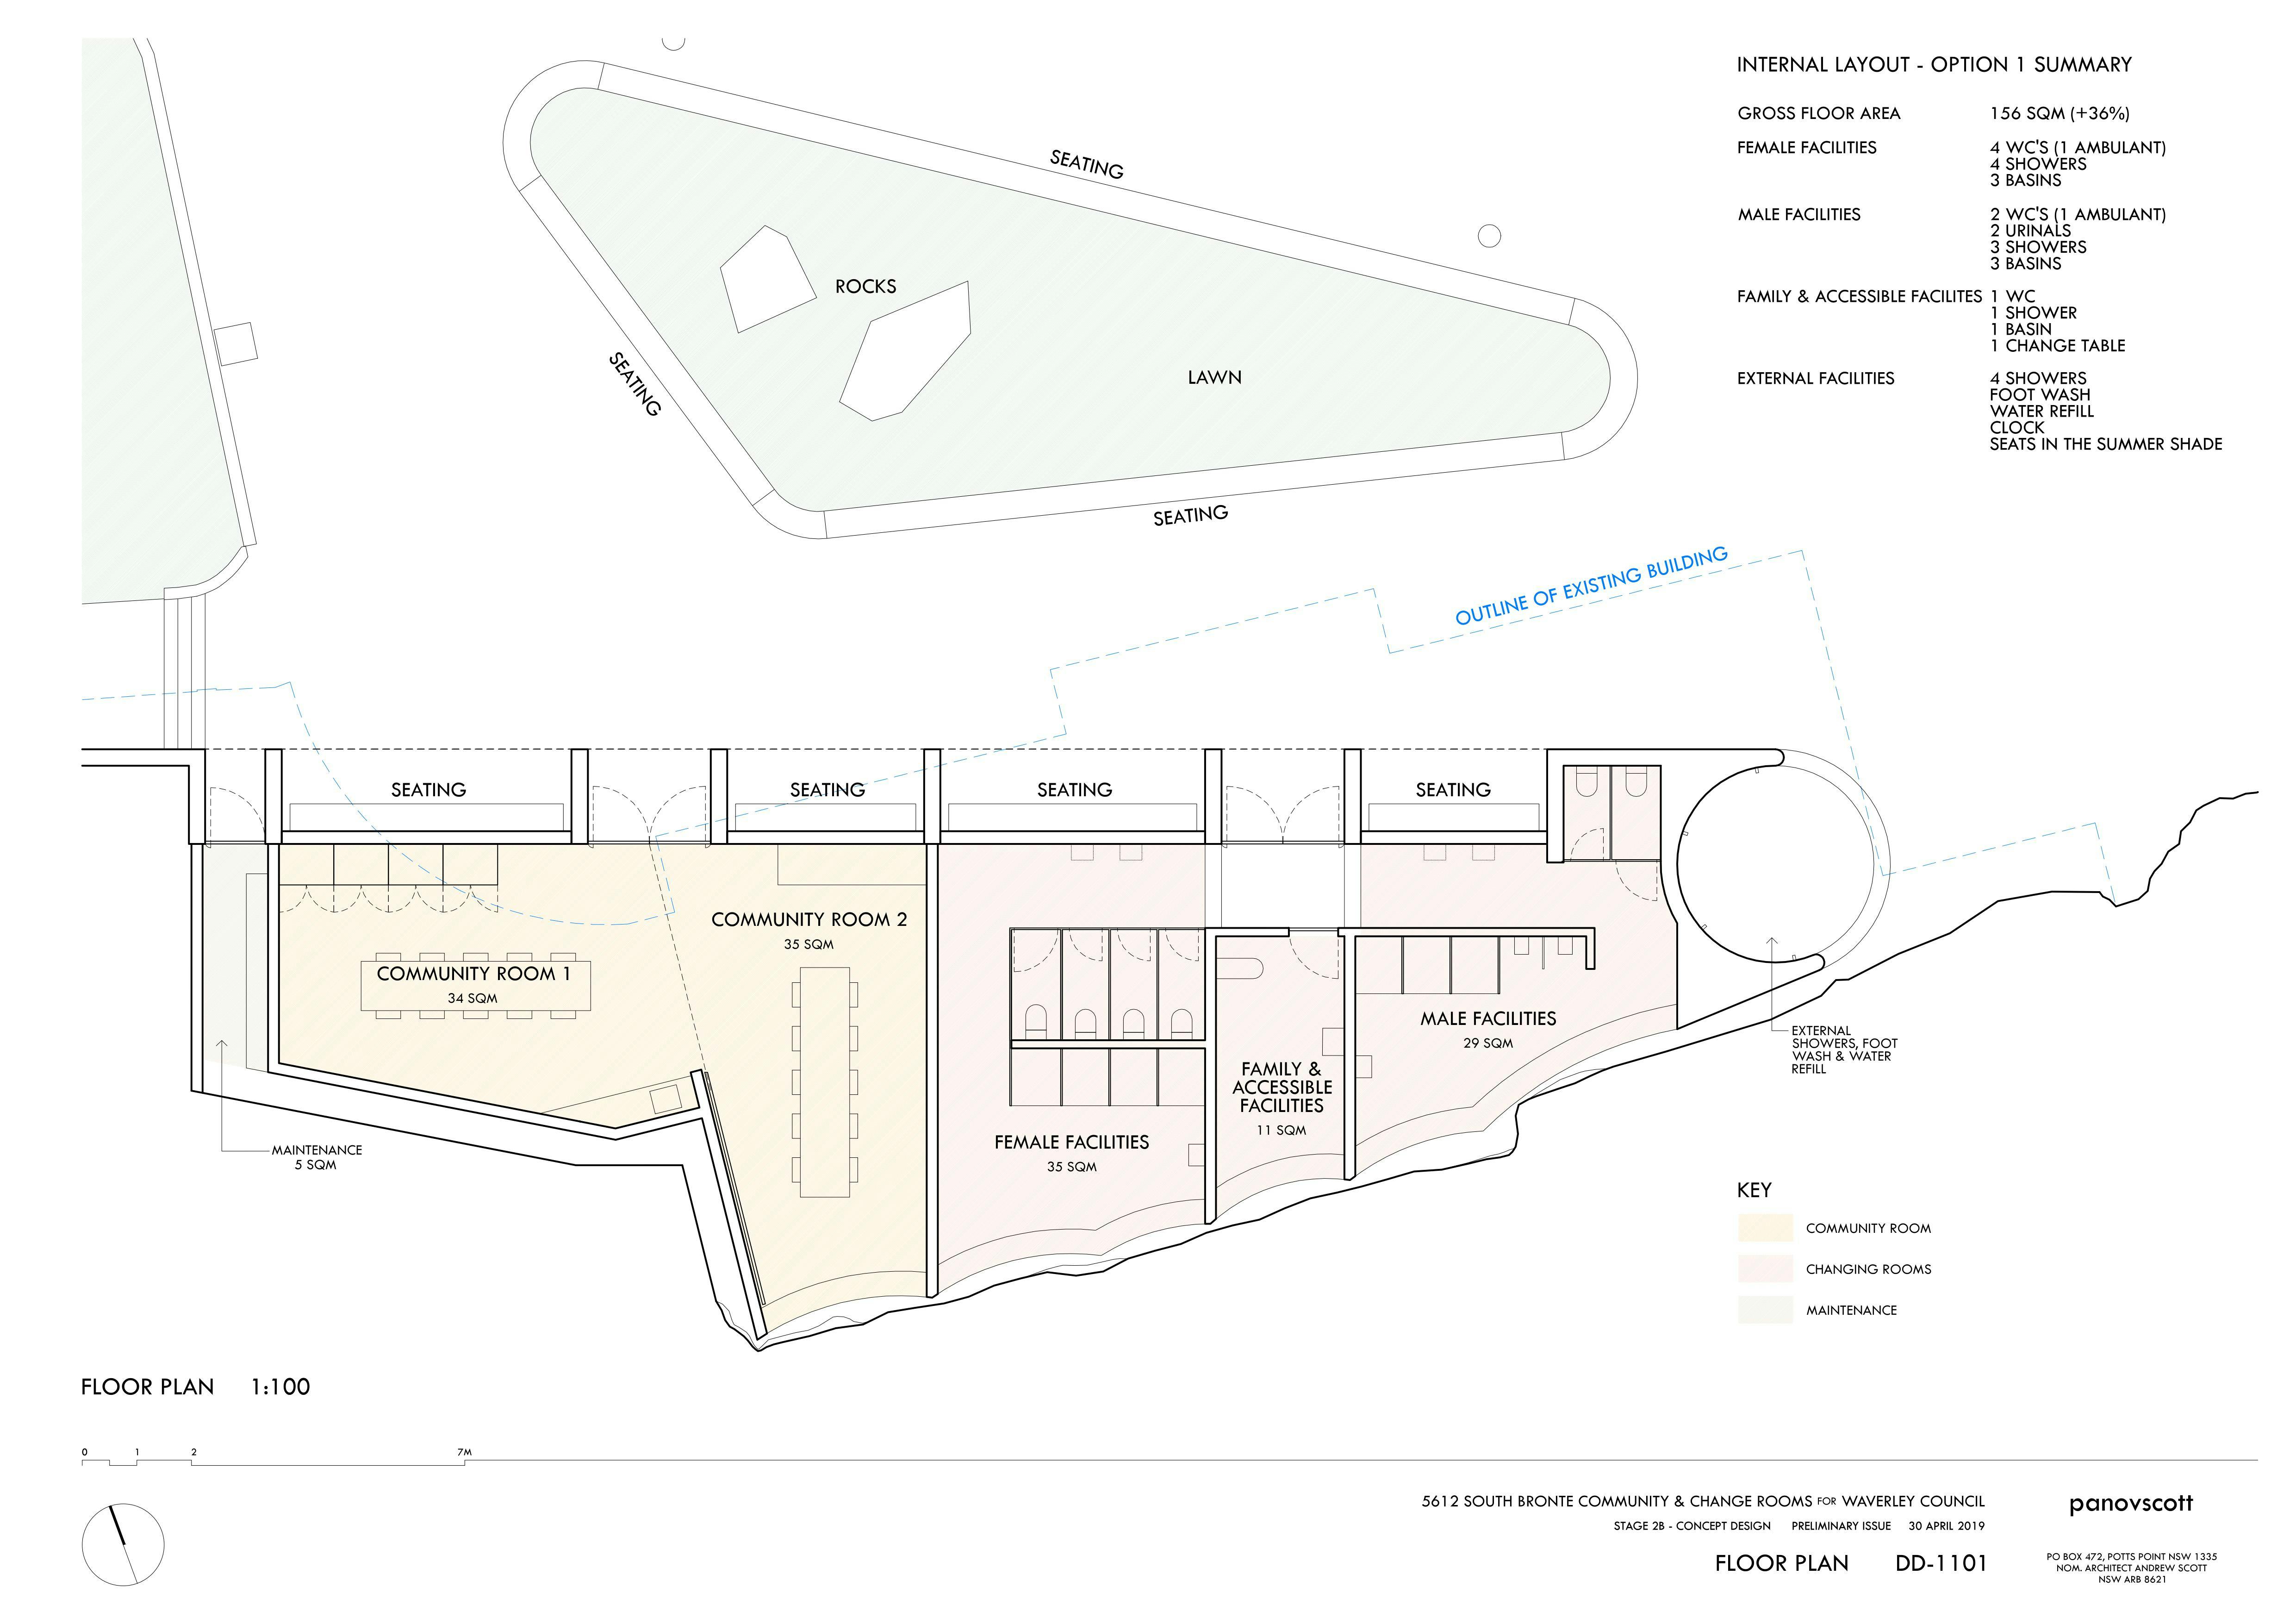 PREVIOUS - South Bronte Amenities and Community Centre floorplan